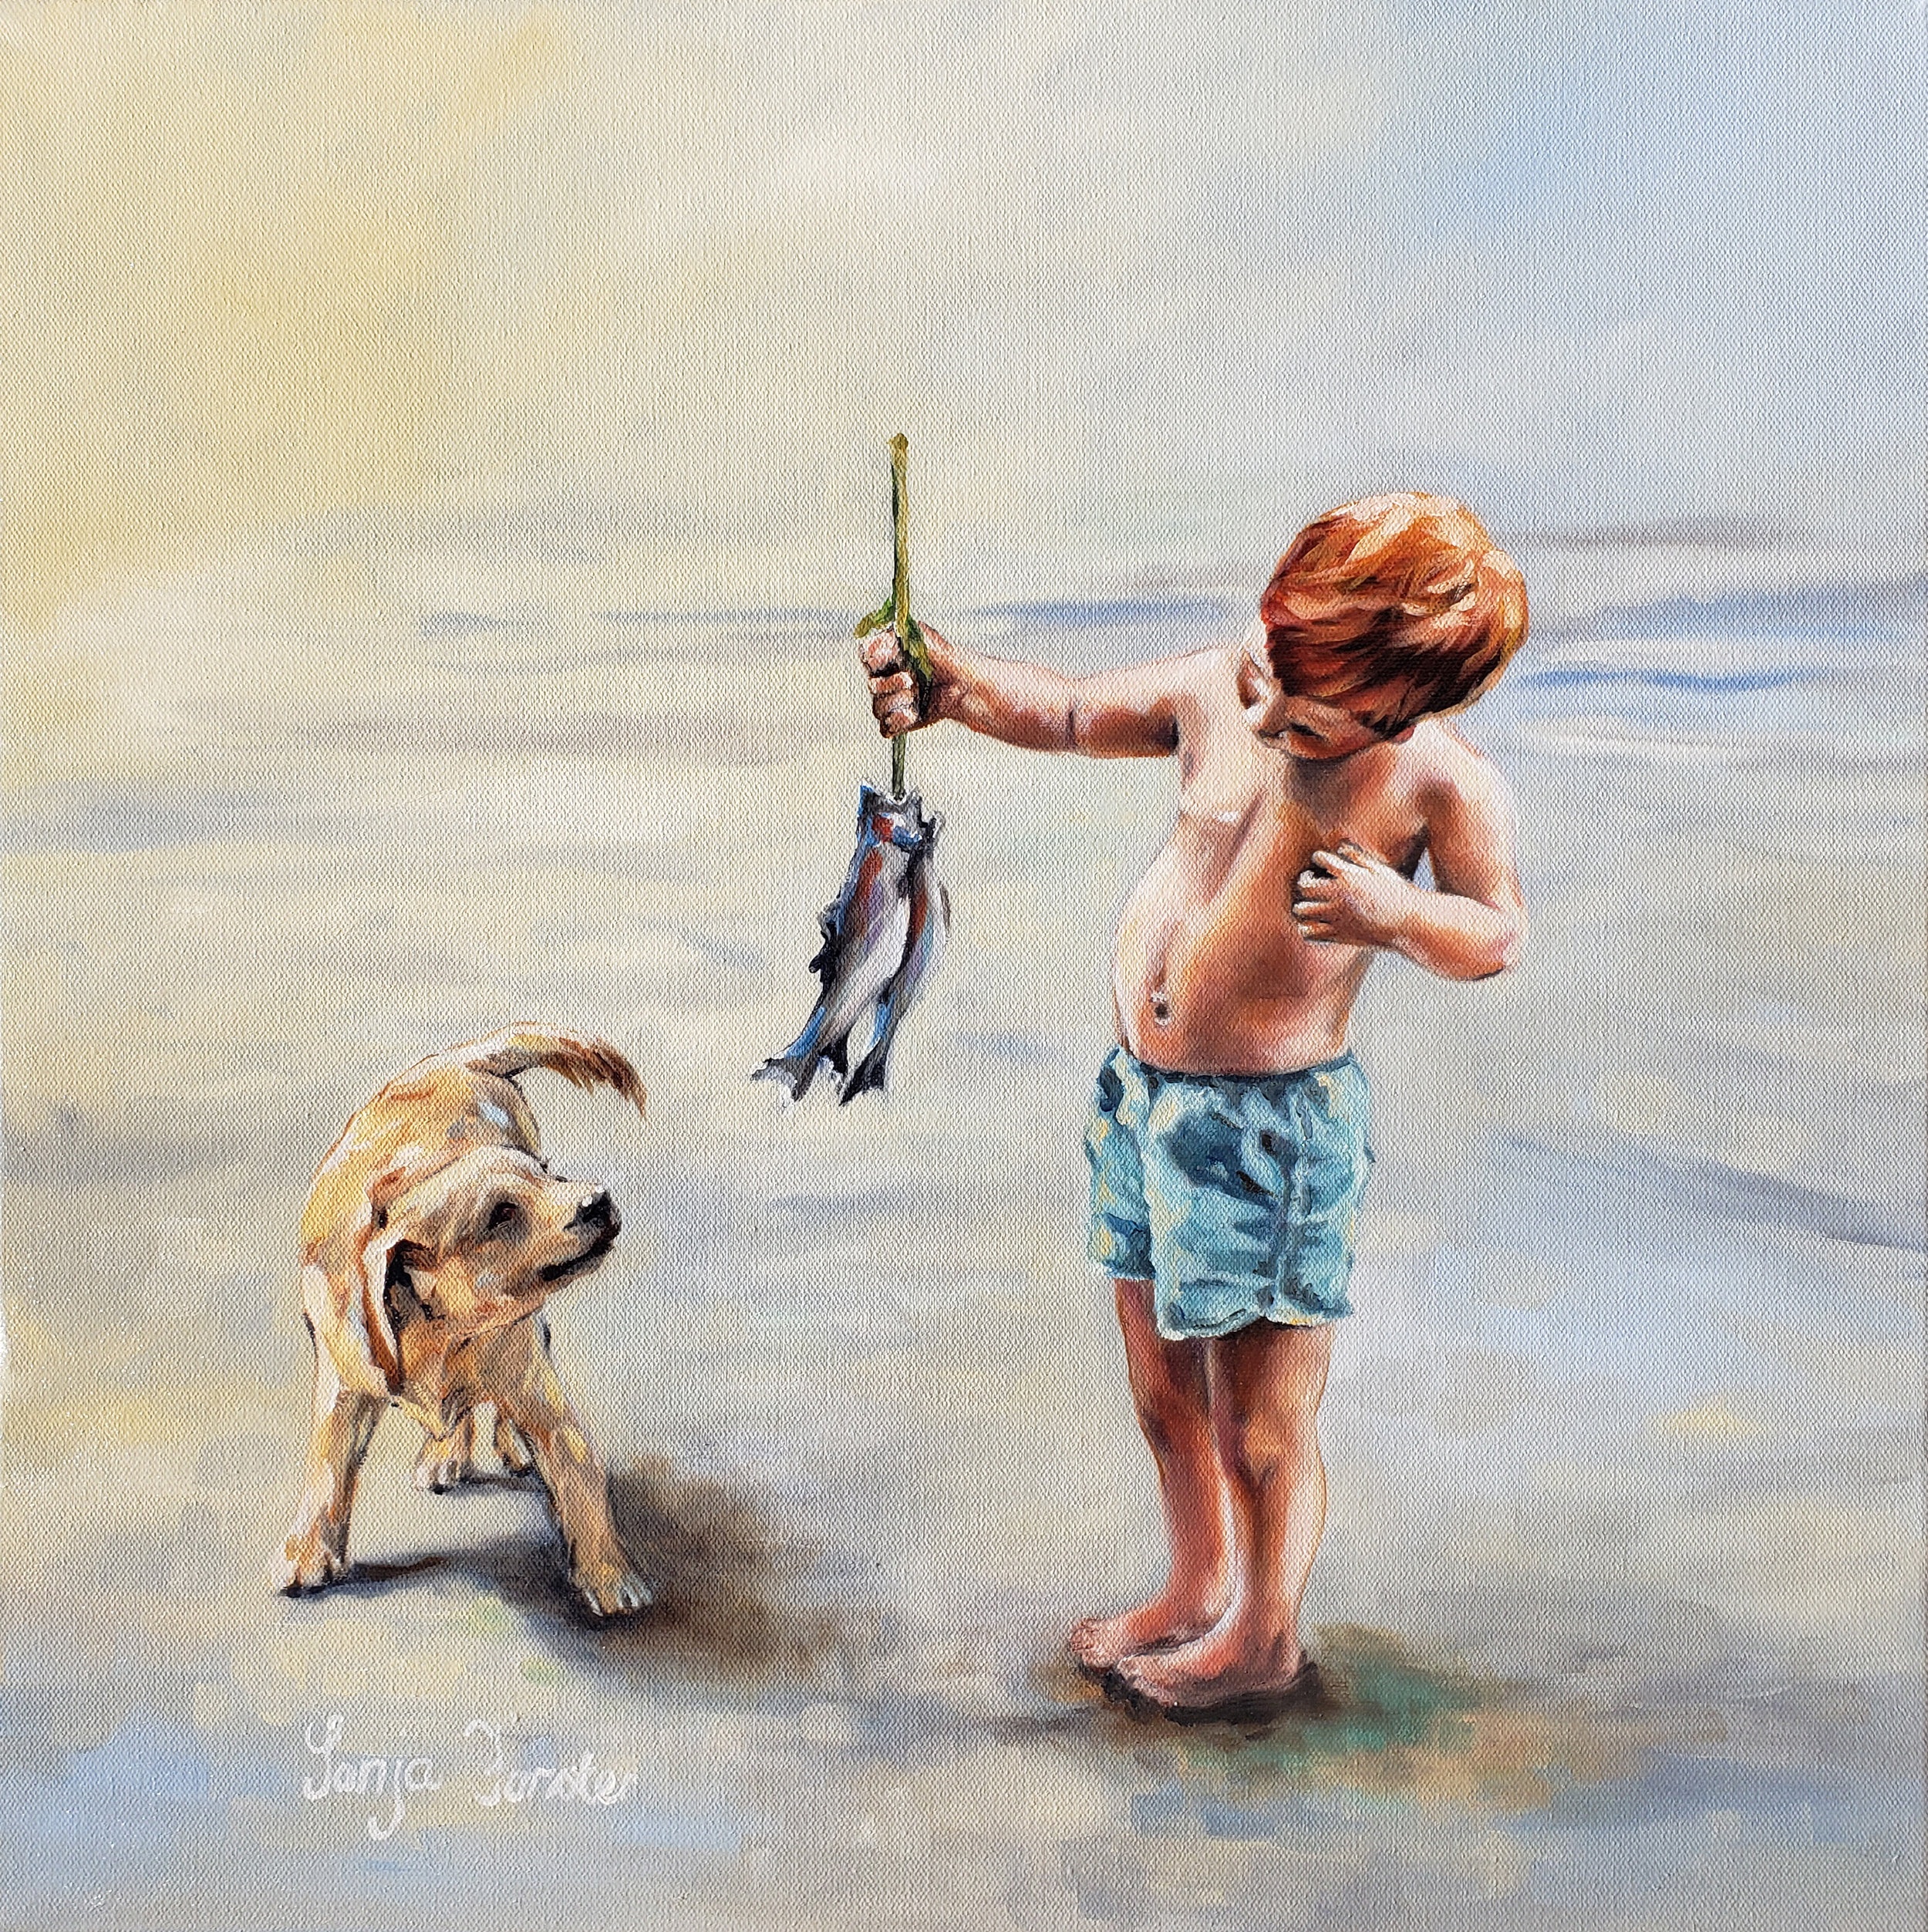 Sonja Forster Art - 20”x 20” Going Fishing with a Friend